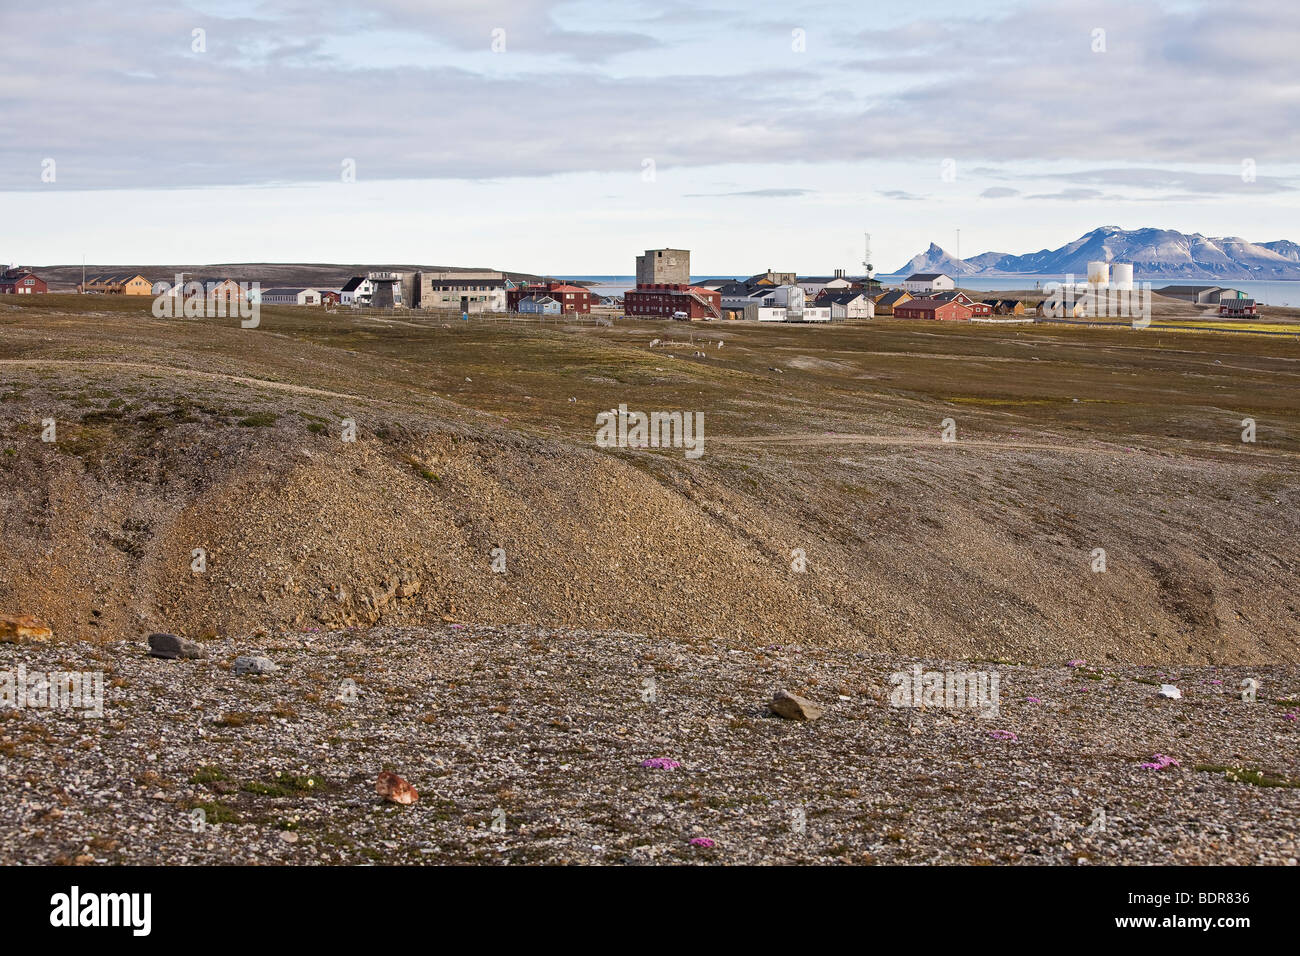 A field station in Svalbard, Norway. Stock Photo